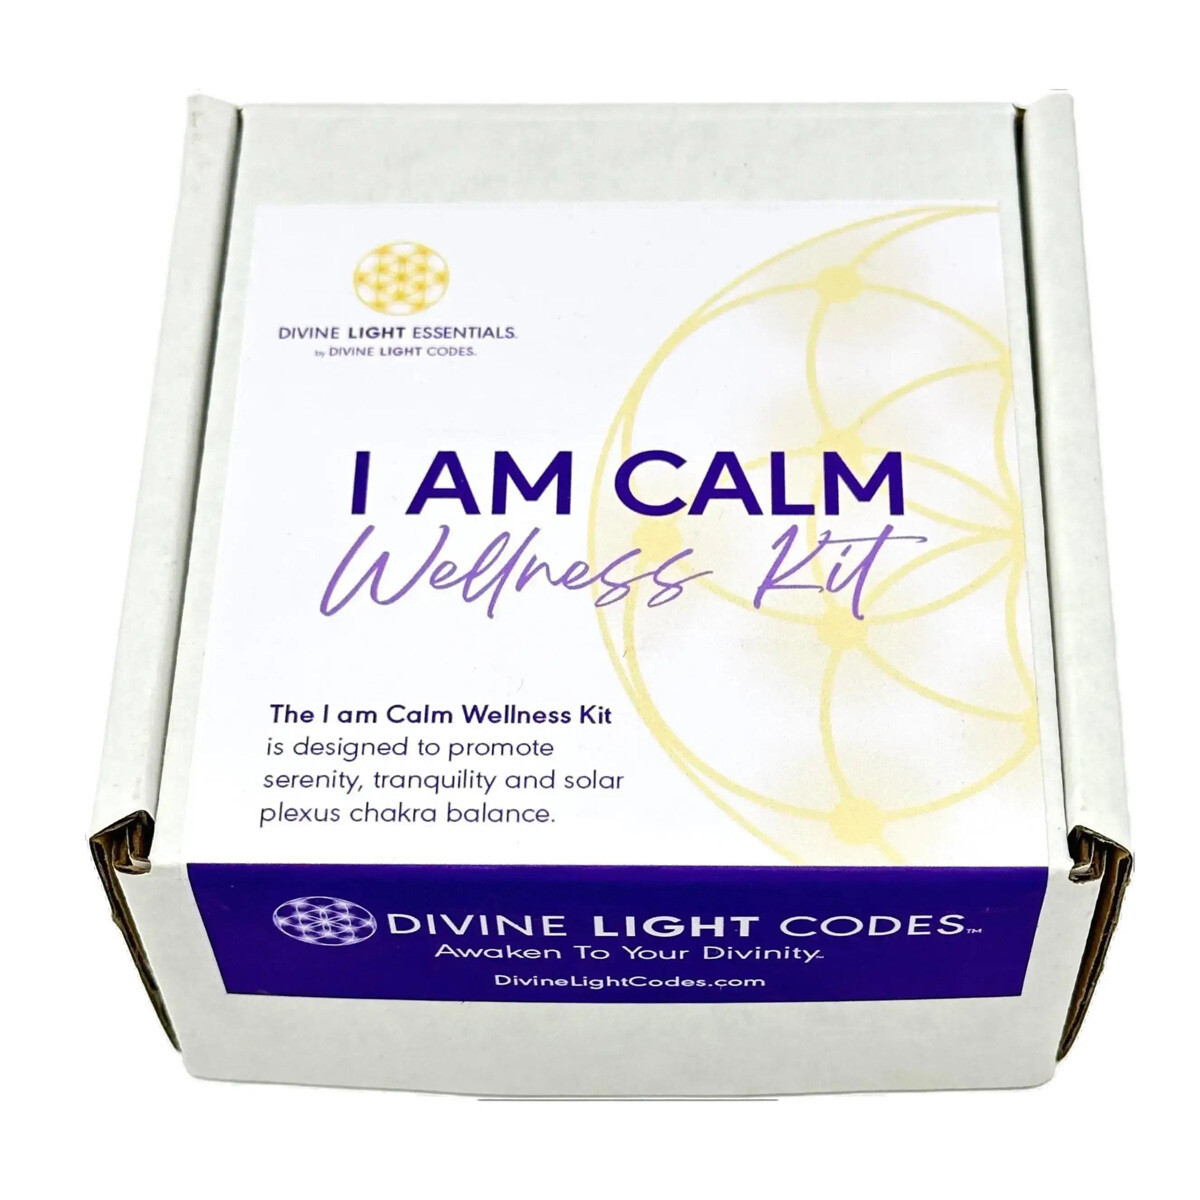 I am Calm Wellness Kit - Small, Choose Your Bracelet Size: Small 6.5" (165 mm)